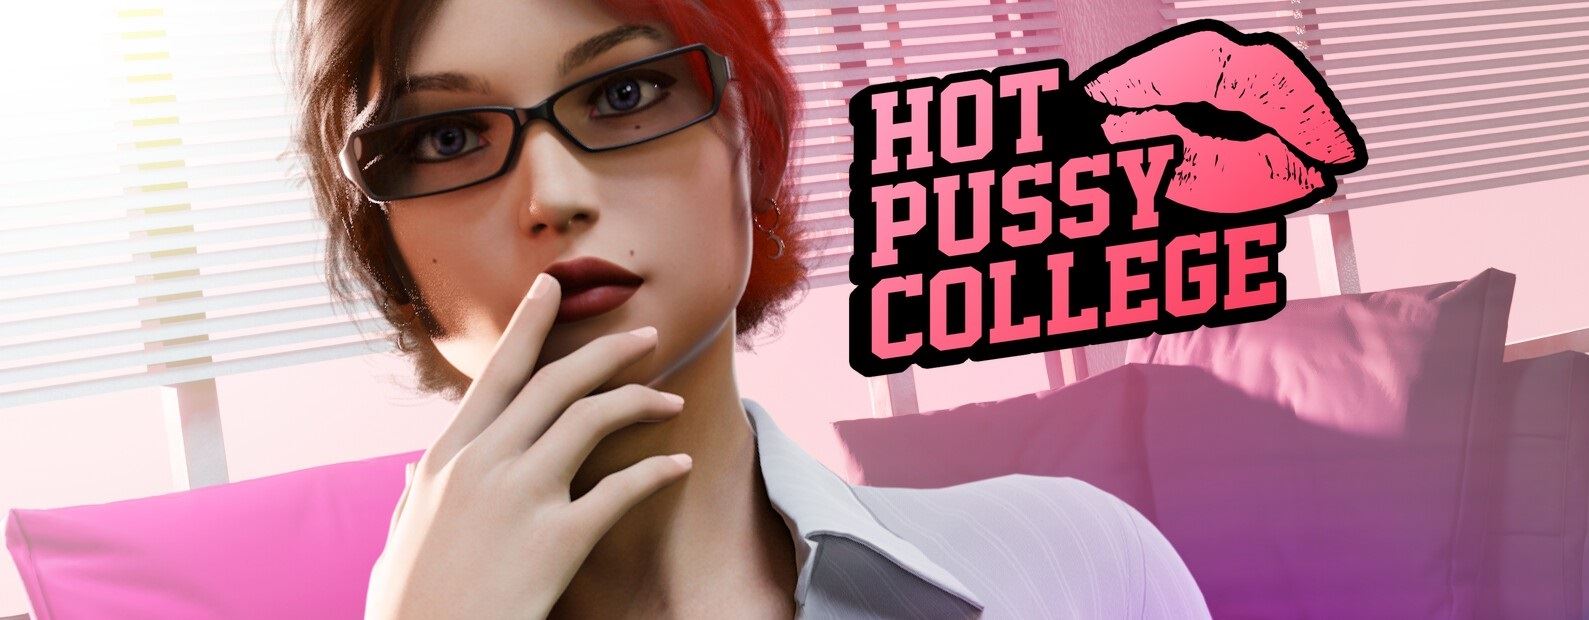 Adult Pussy Games - Unity] Hot Pussy College - v2022-10-15 by Octo Games 18+ Adult xxx Porn Game  Download